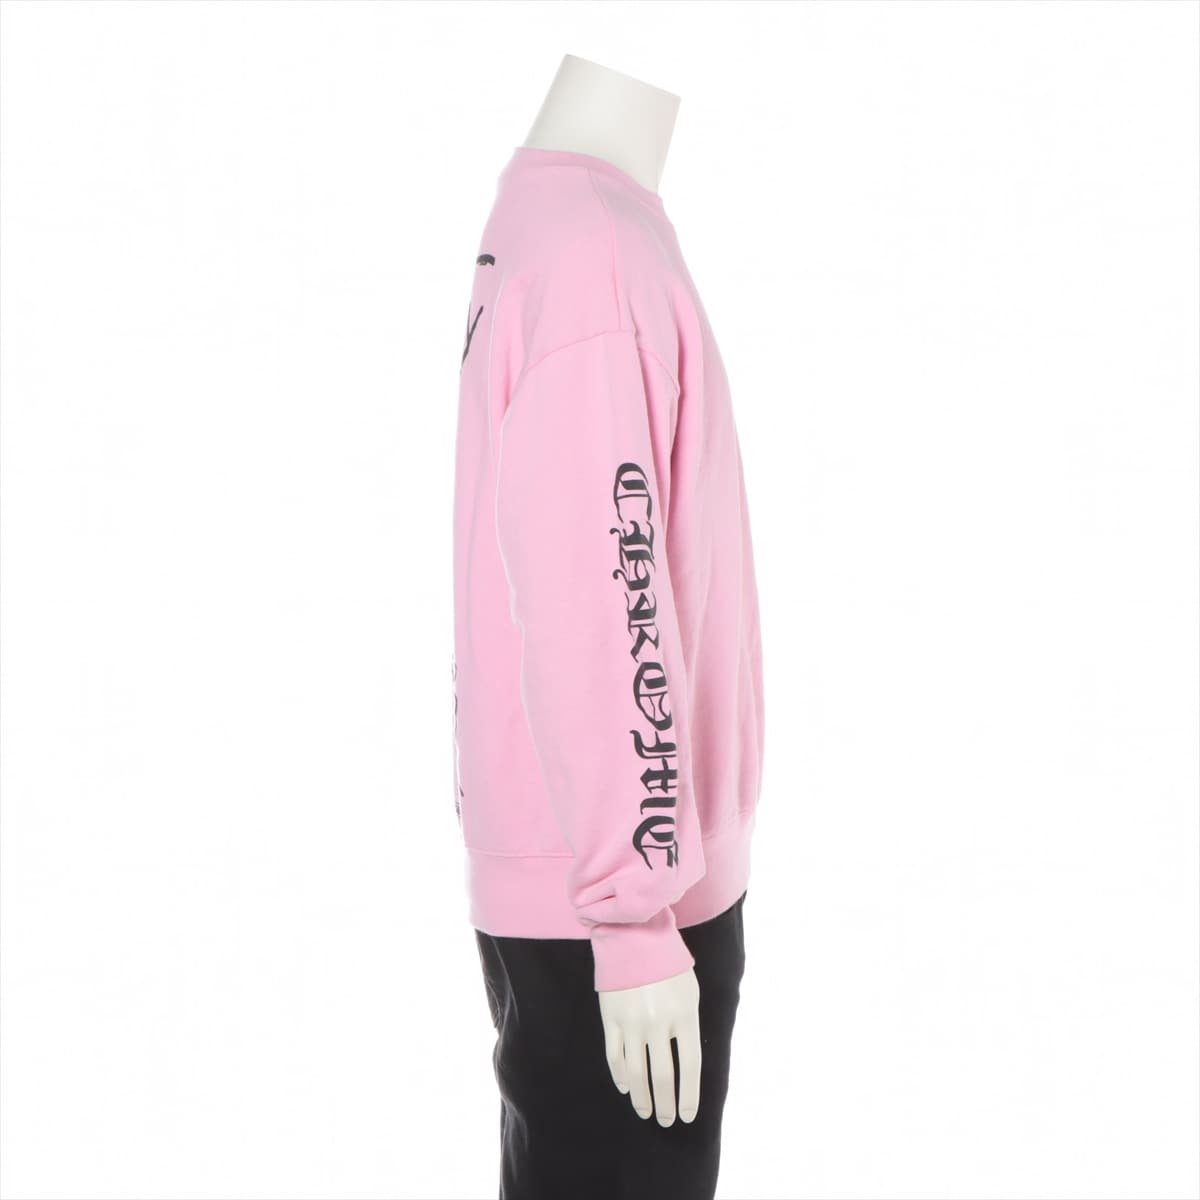 Chrome Hearts Matty Boy Basic knitted fabric Cotton M Pink There is a stain on the front